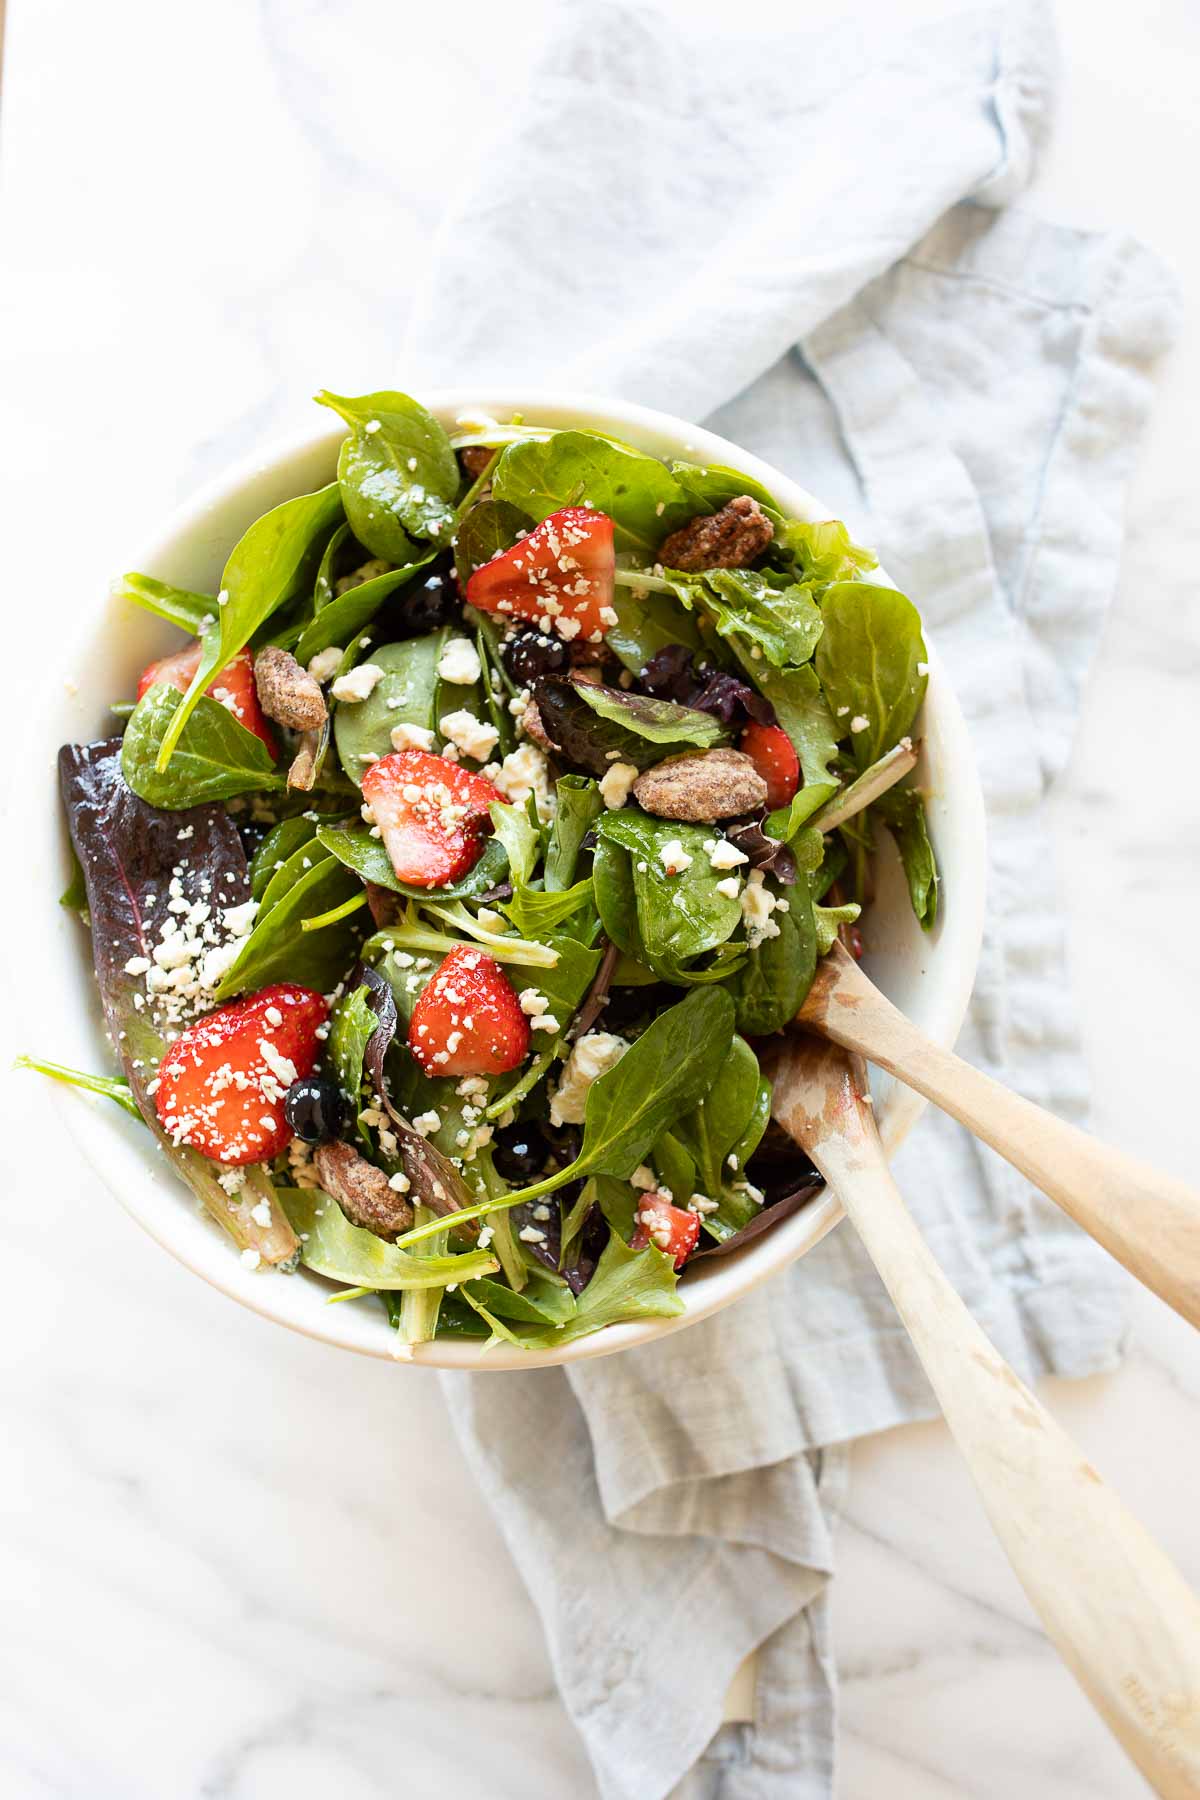 An Easter-inspired bowl of spinach salad with strawberries and walnuts.